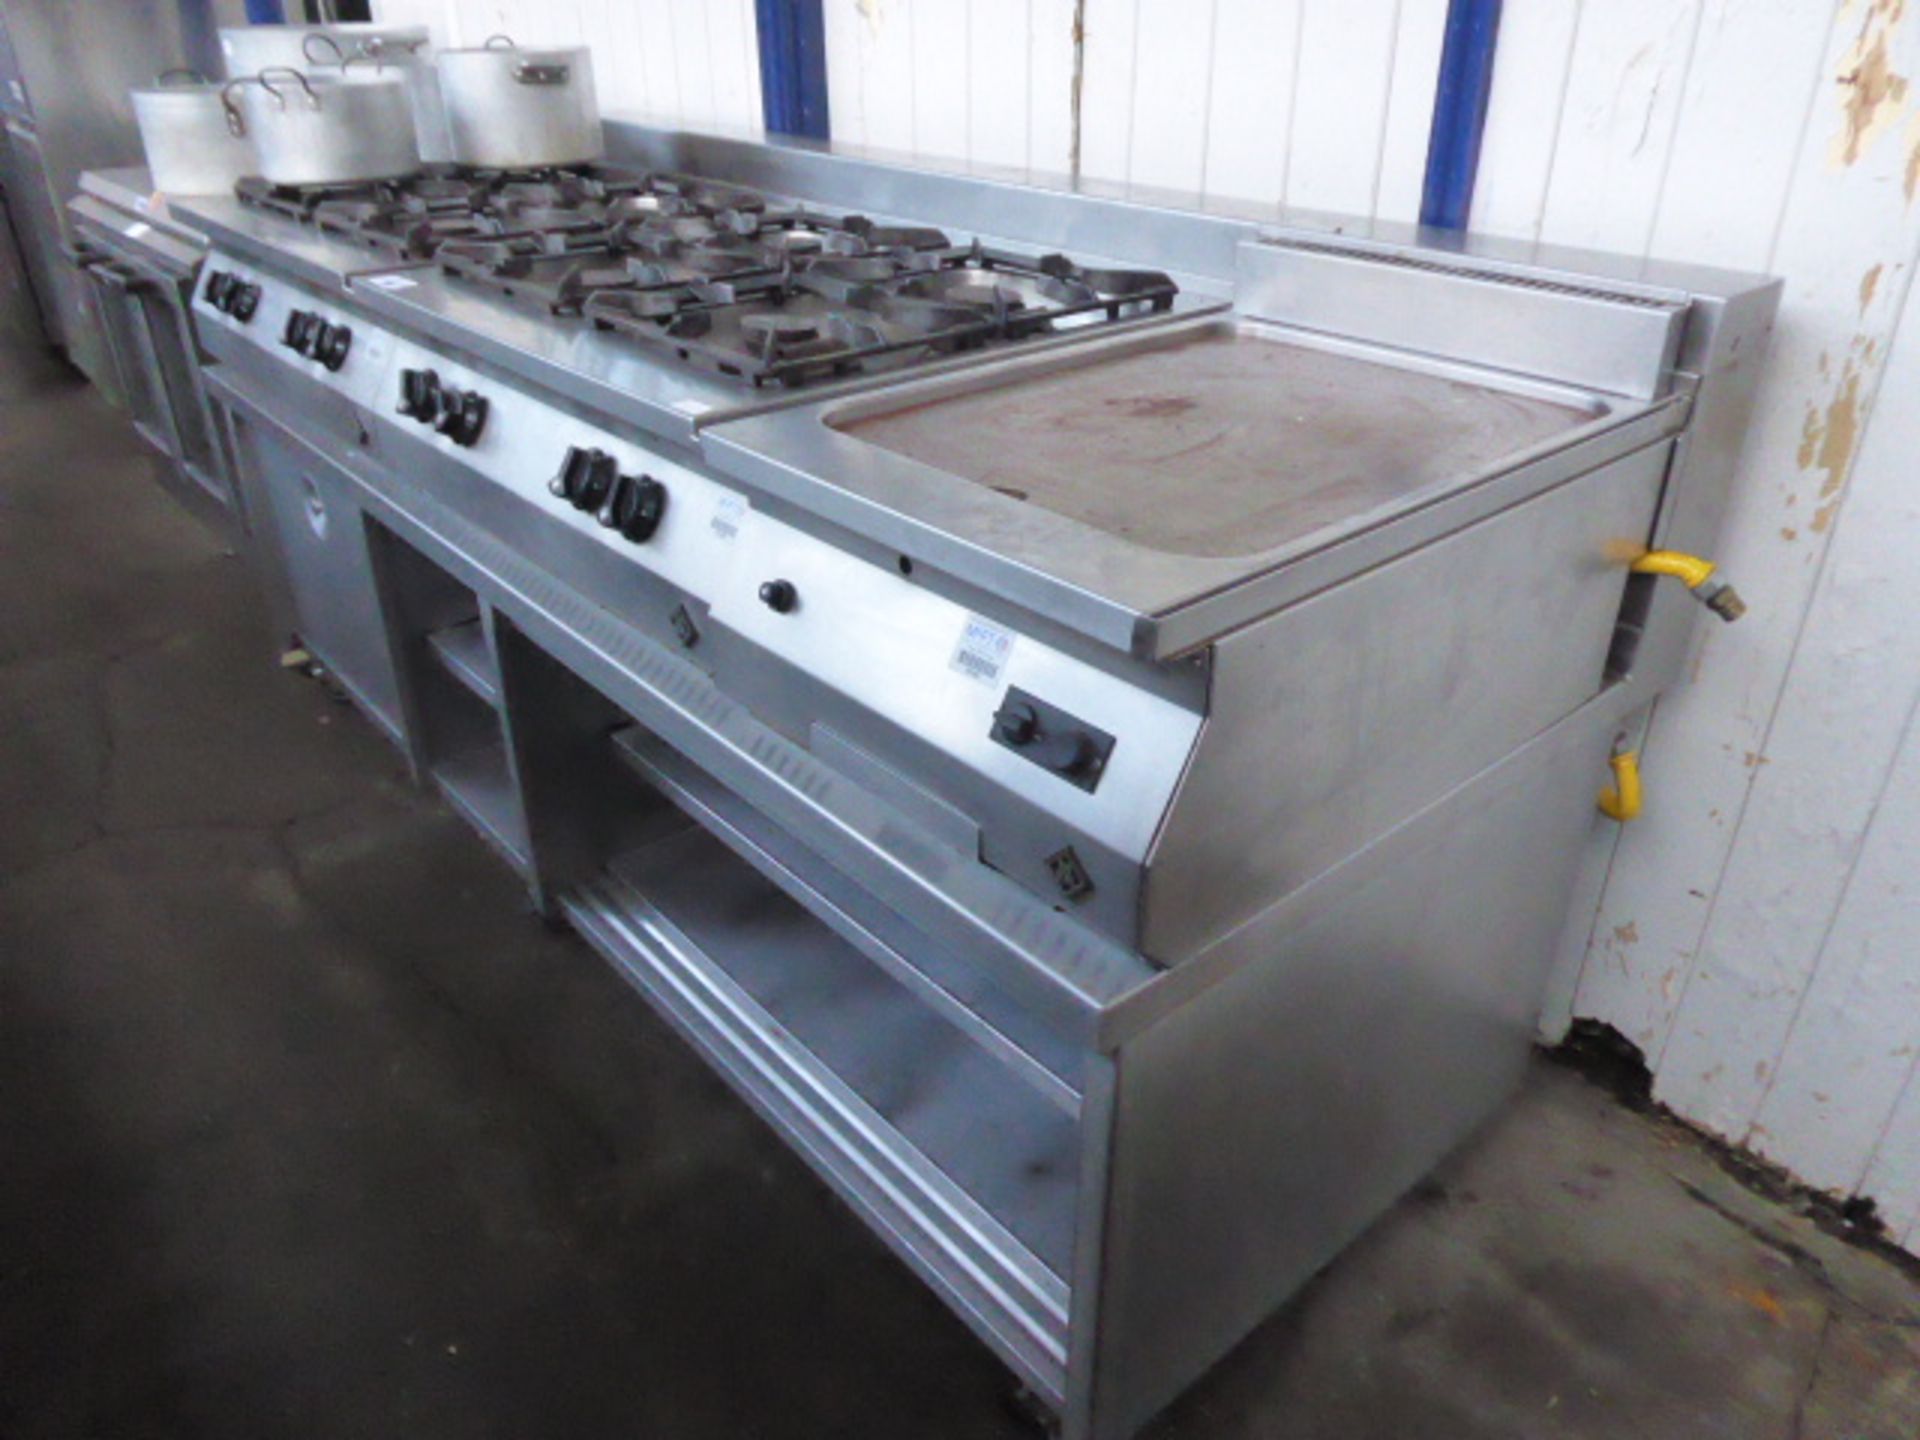 (145) 210cm gas MKN suite to include 2 4 burner cookers, a flat plate griddle on customised